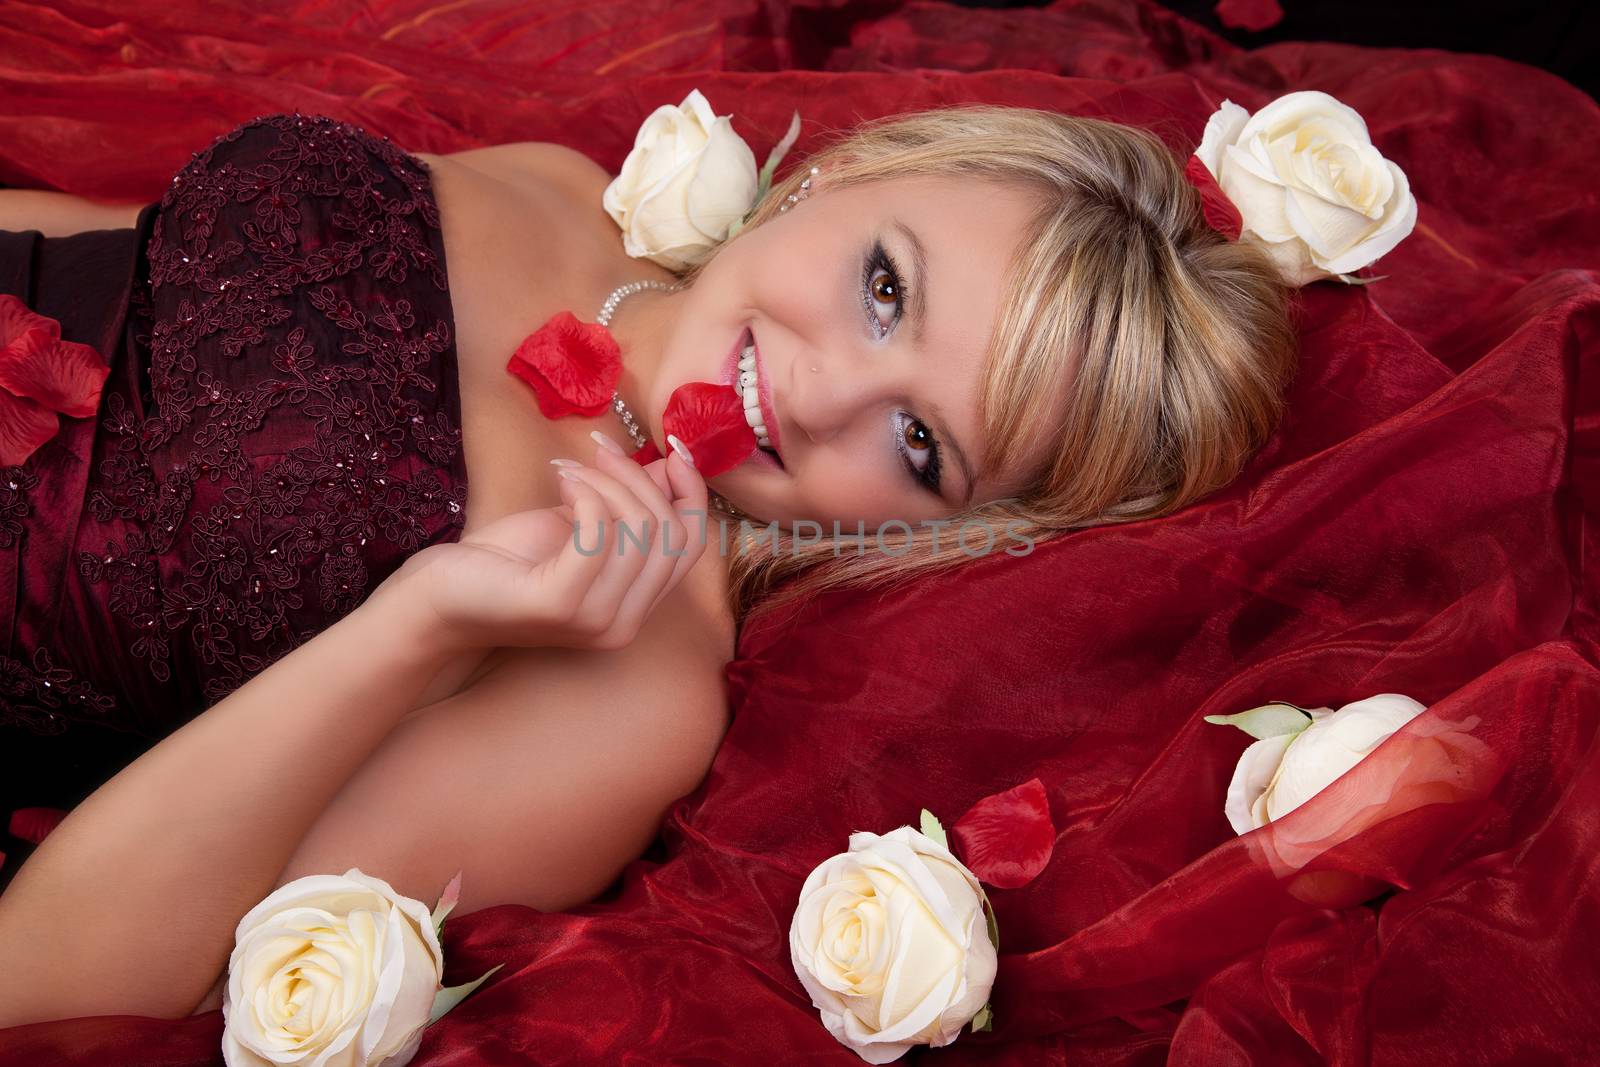 Young blonde woman is lying in roses by 25ehaag6